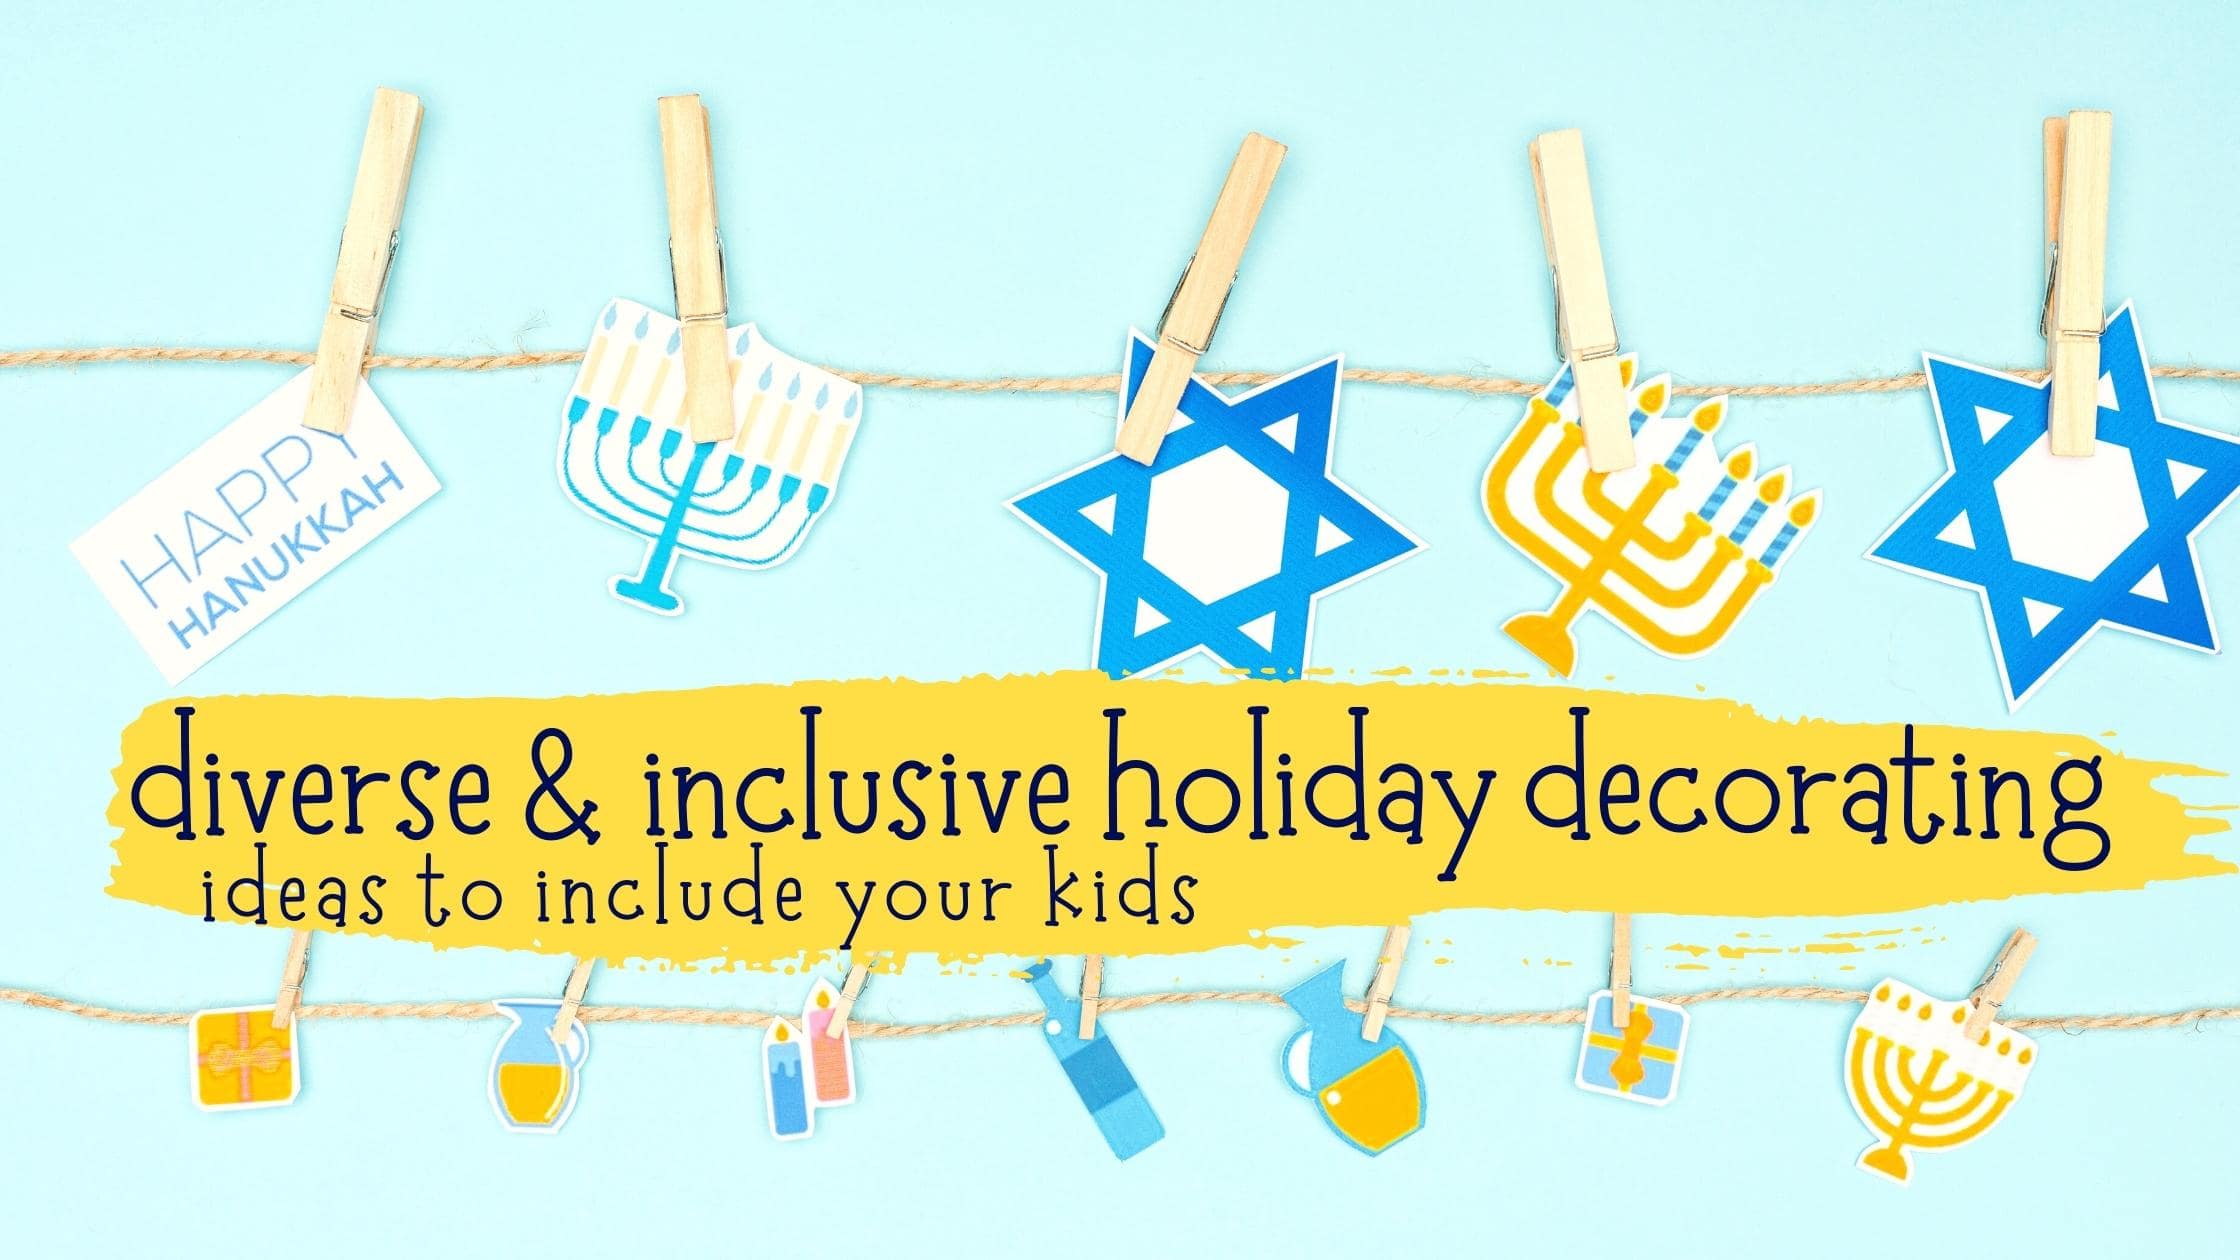 Holiday Decorating, Holiday Decorating for Kids, alternative holidays, winter holidays, decorating for kwanzaa,